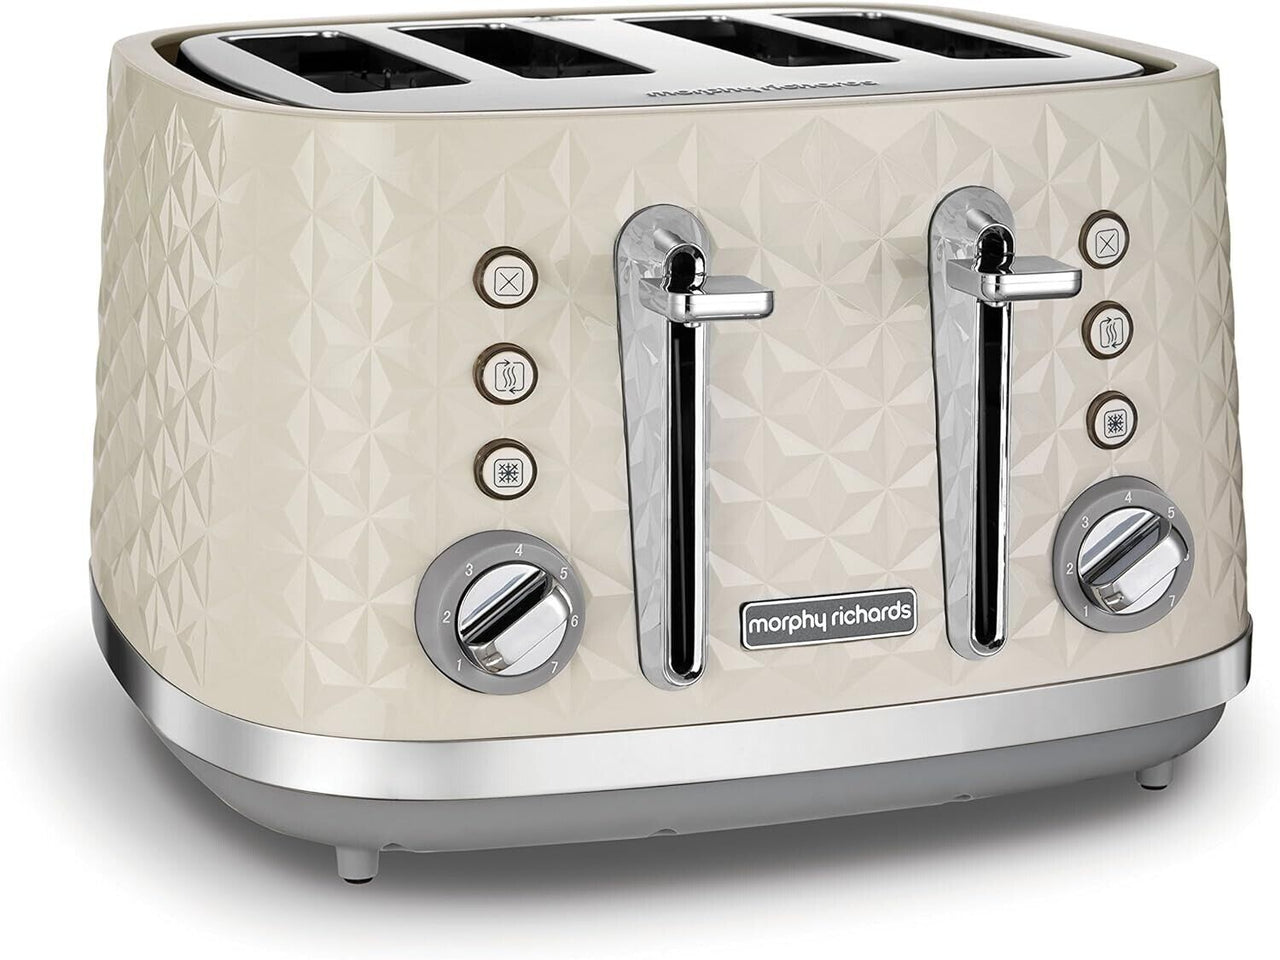 Morphy Richards Vector 4 Slice Toaster in Cream with Patterned 3D Finish 248132